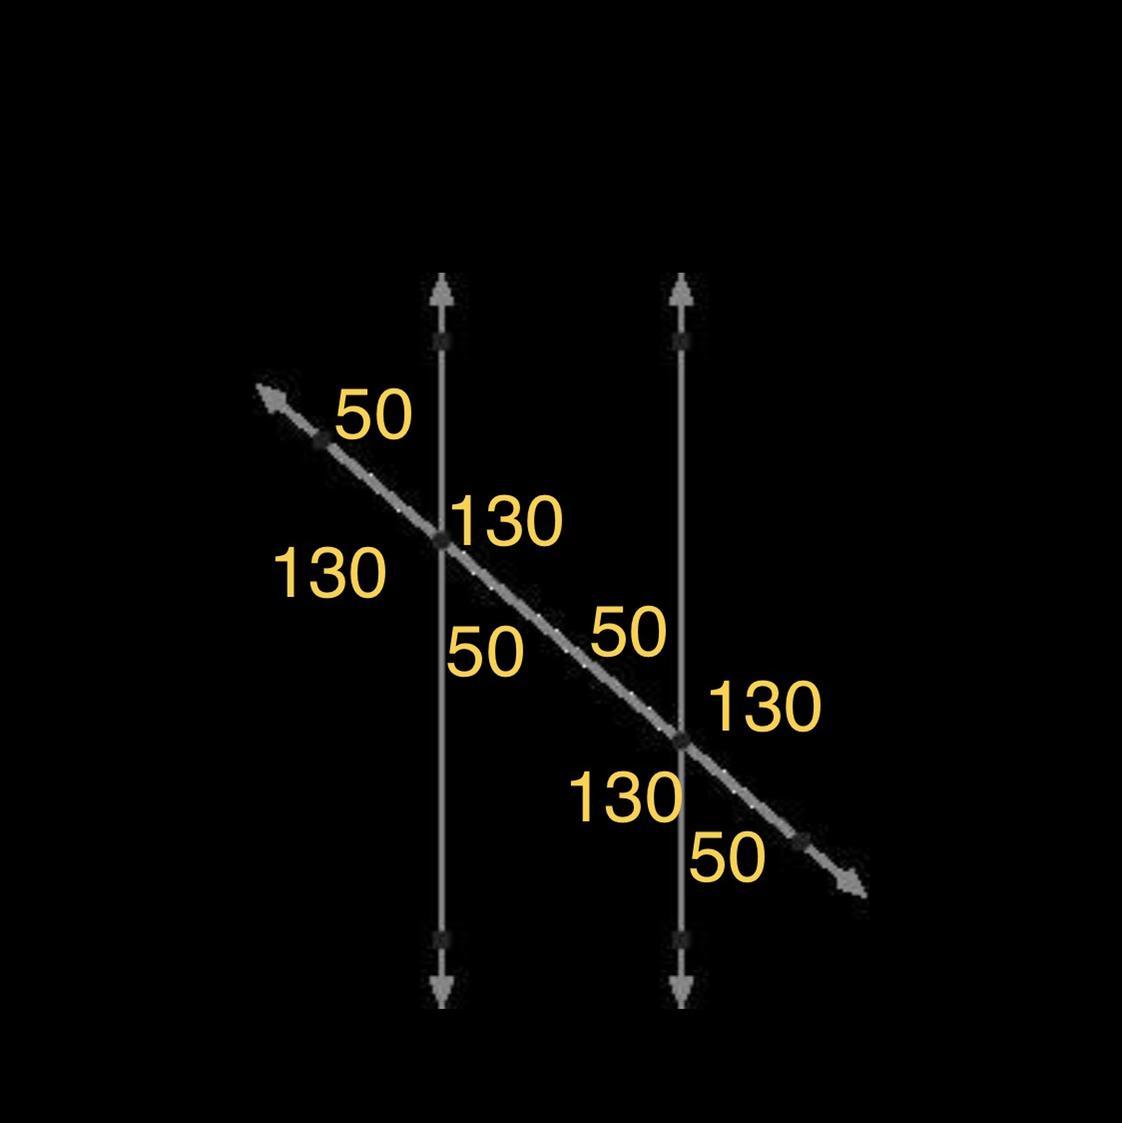 If BD And EG Are Parallel Lines And MBCF = 50, What Is MEFH?Look At This Diagram: